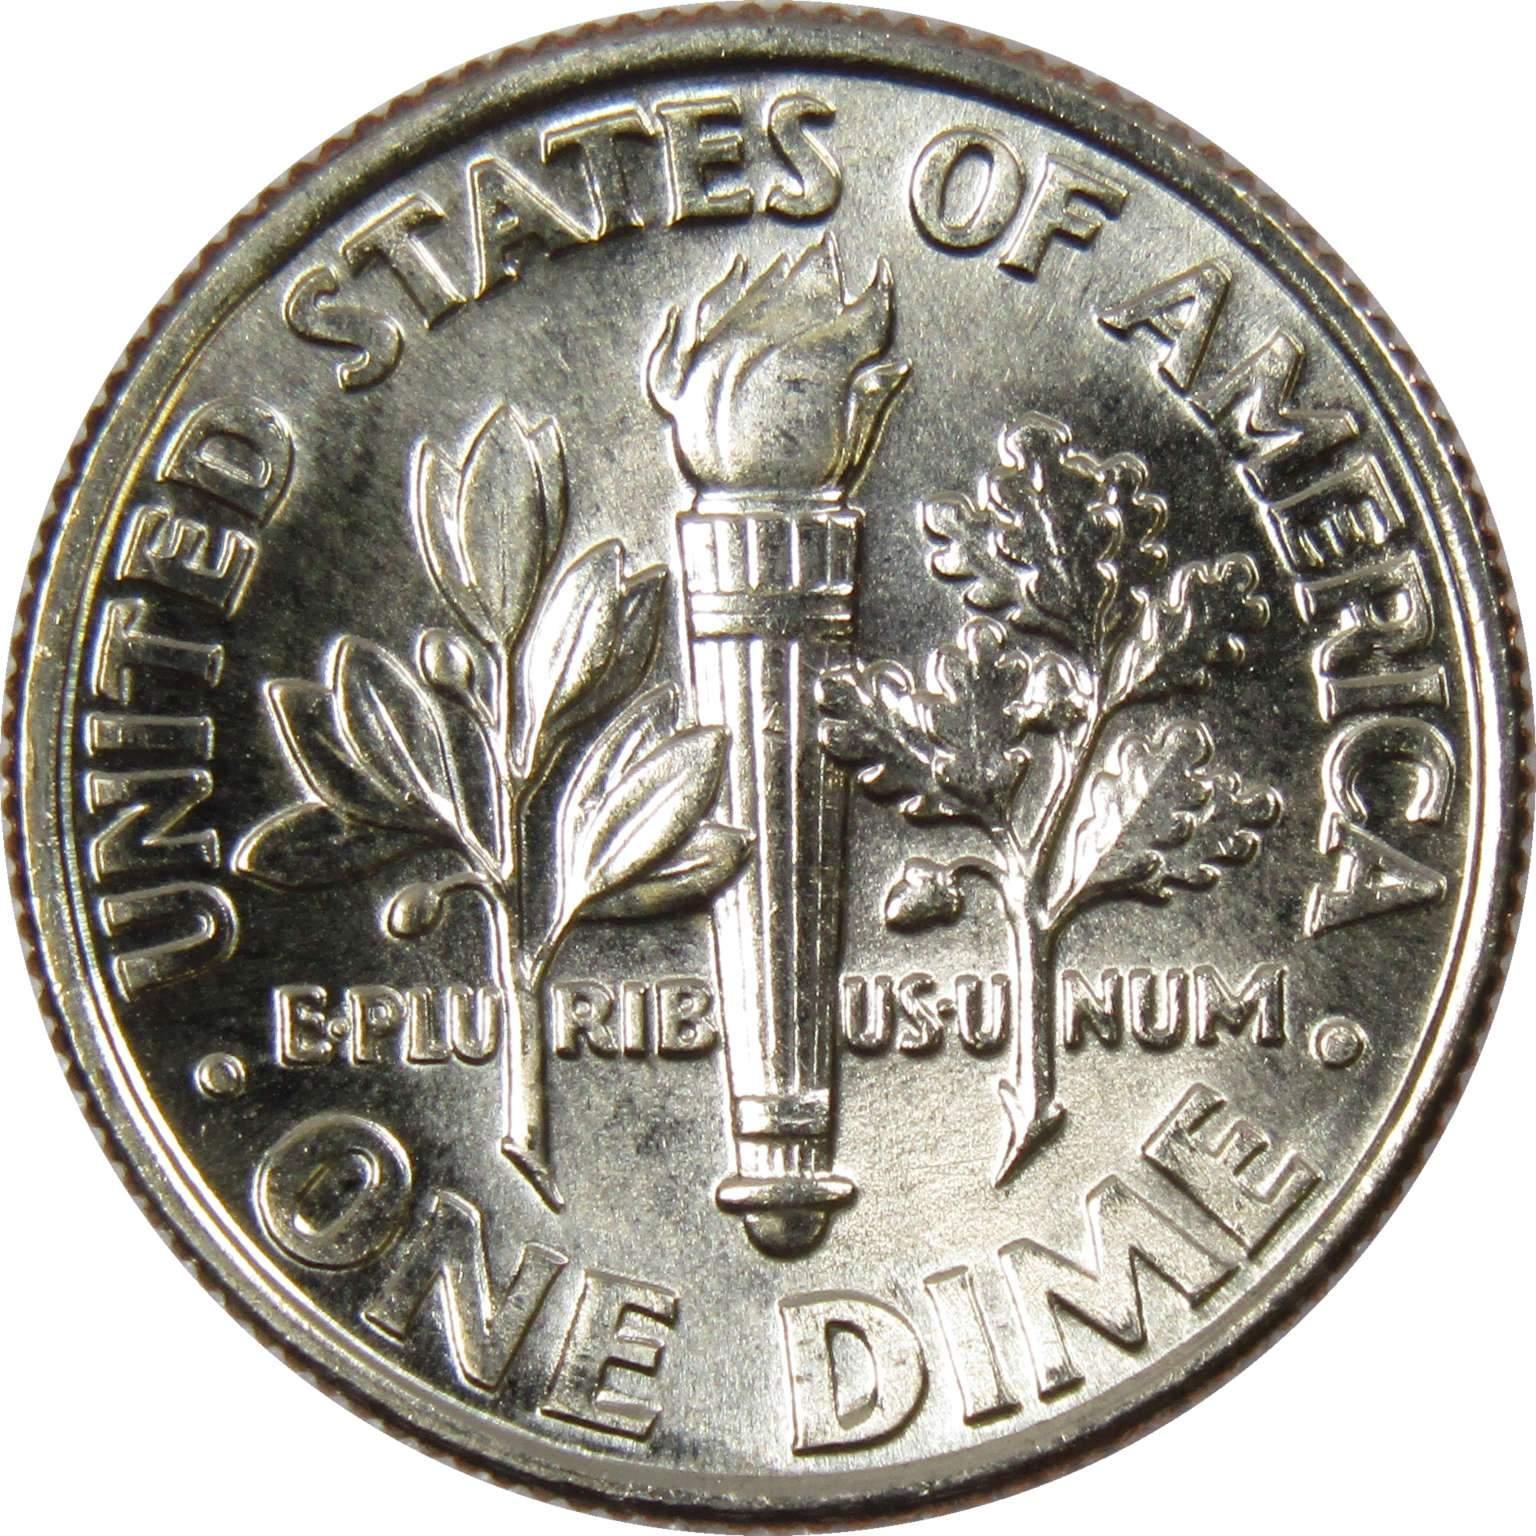 1988 D Roosevelt Dime BU Uncirculated Mint State 10c US Coin Collectible